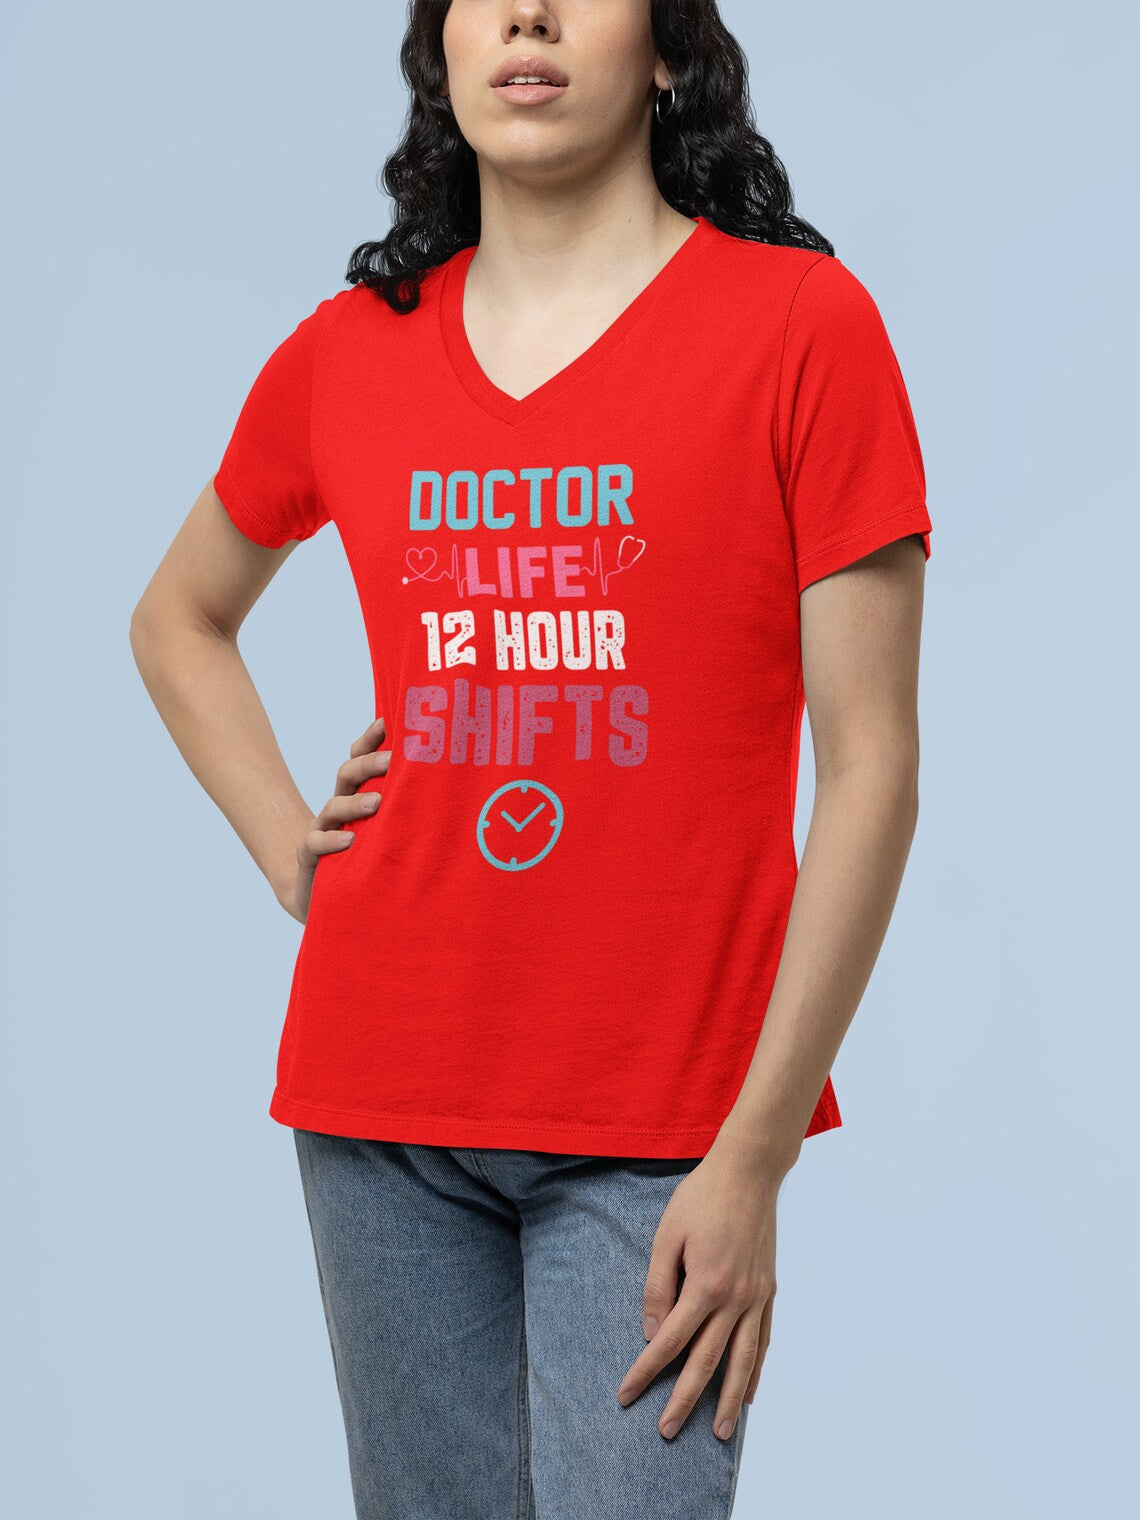 Doctor Life 12 Hour Shifts Women's Short Sleeve V-Neck Tee, Doctor shirts, Doctor gift ideas, doctors gift, women shirt with doctor design